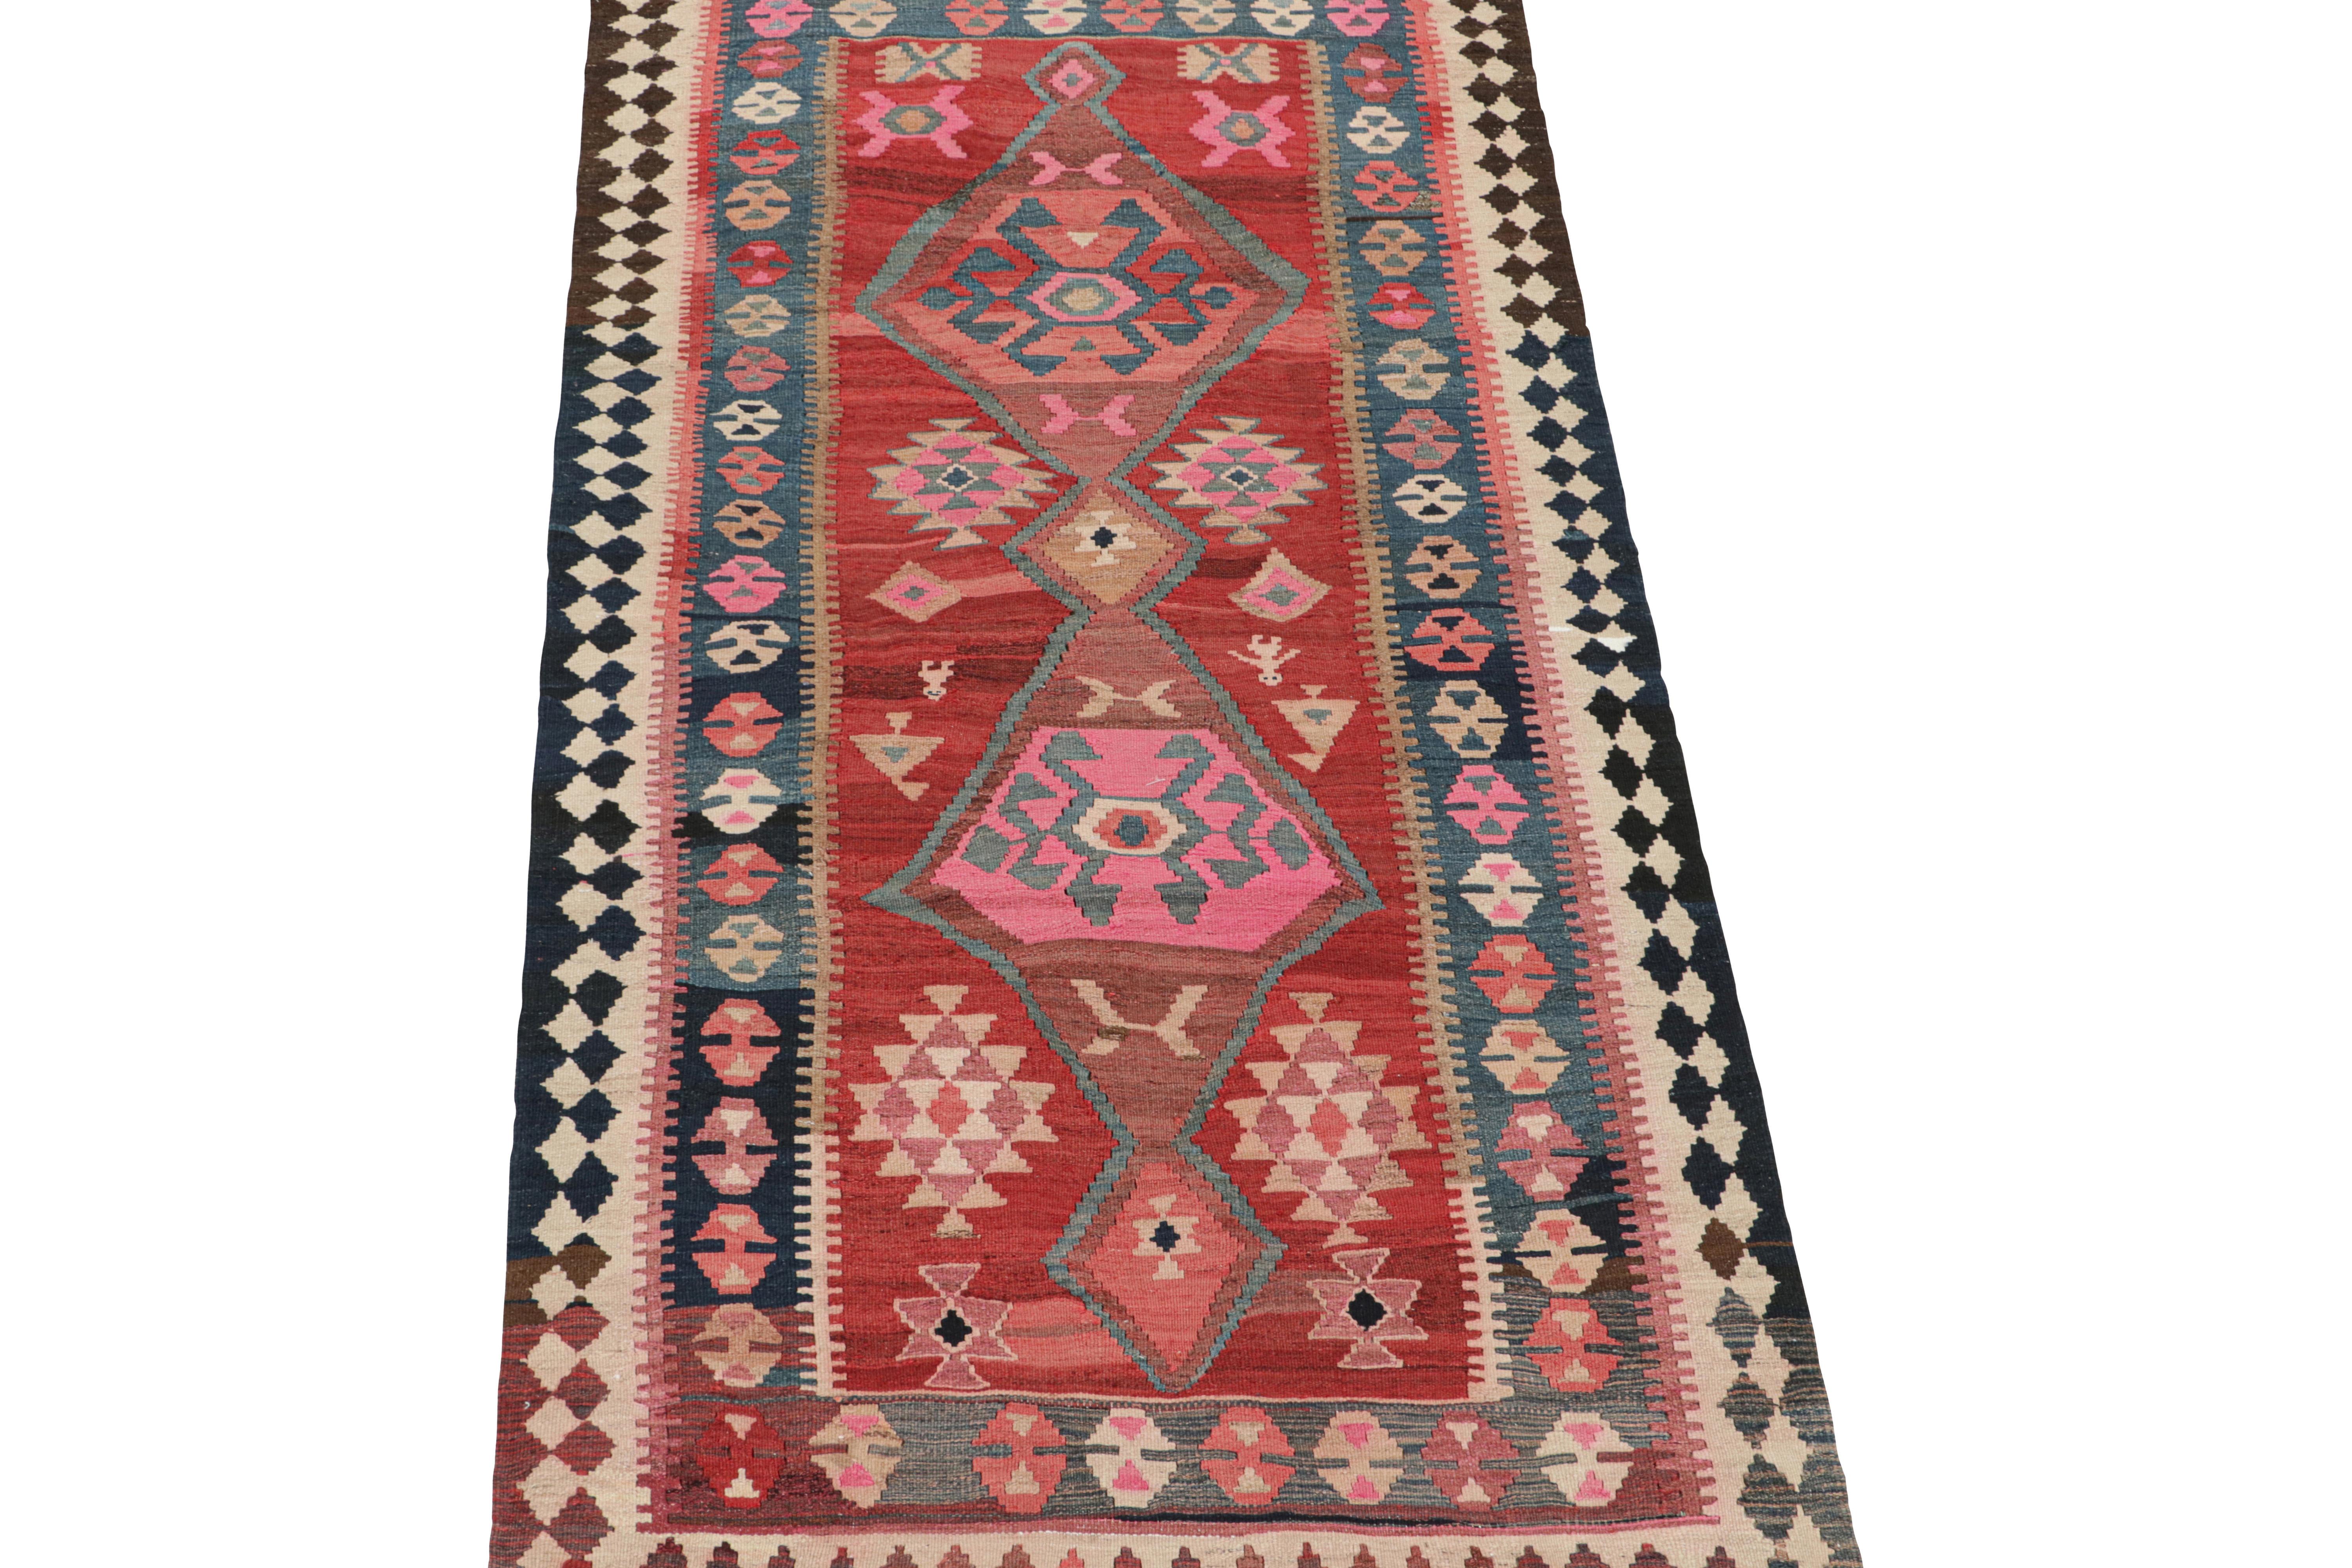 Hand-Knotted Vintage Shahsavan Persian Kilim in Red, Blue & Pink Patterns For Sale